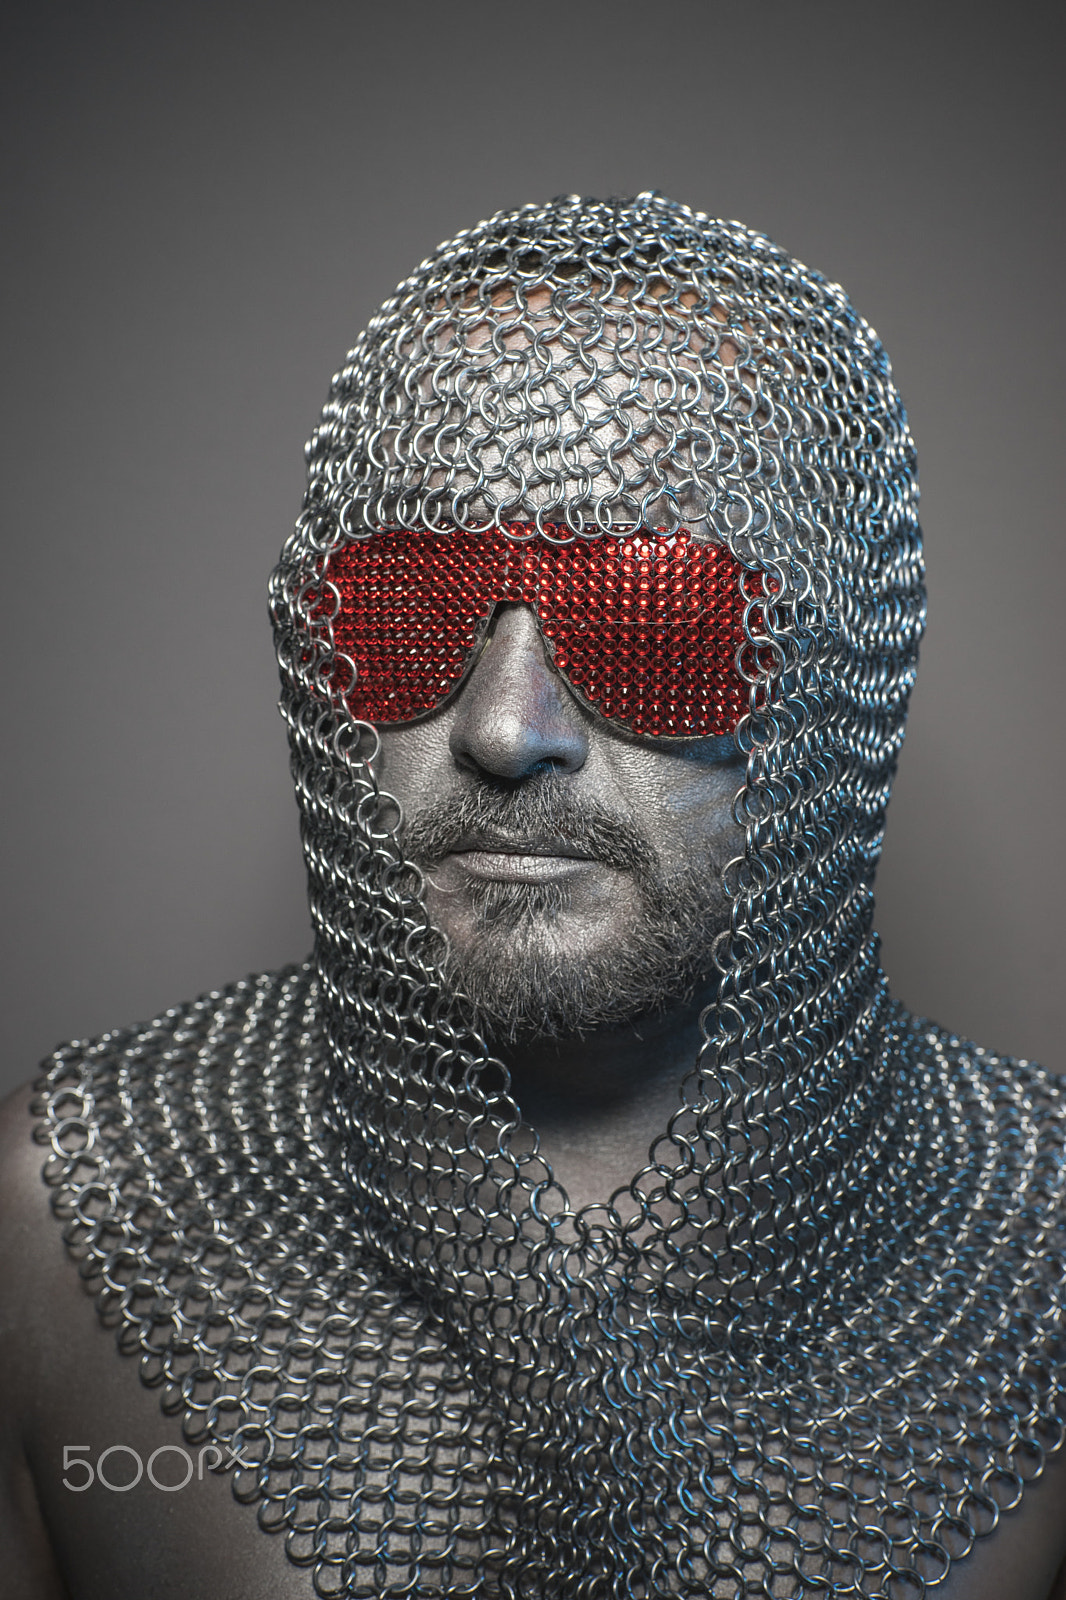 Sony a7 + Sony DT 50mm F1.8 SAM sample photo. Man in chain mail and leather painted silver, medieval warrior photography